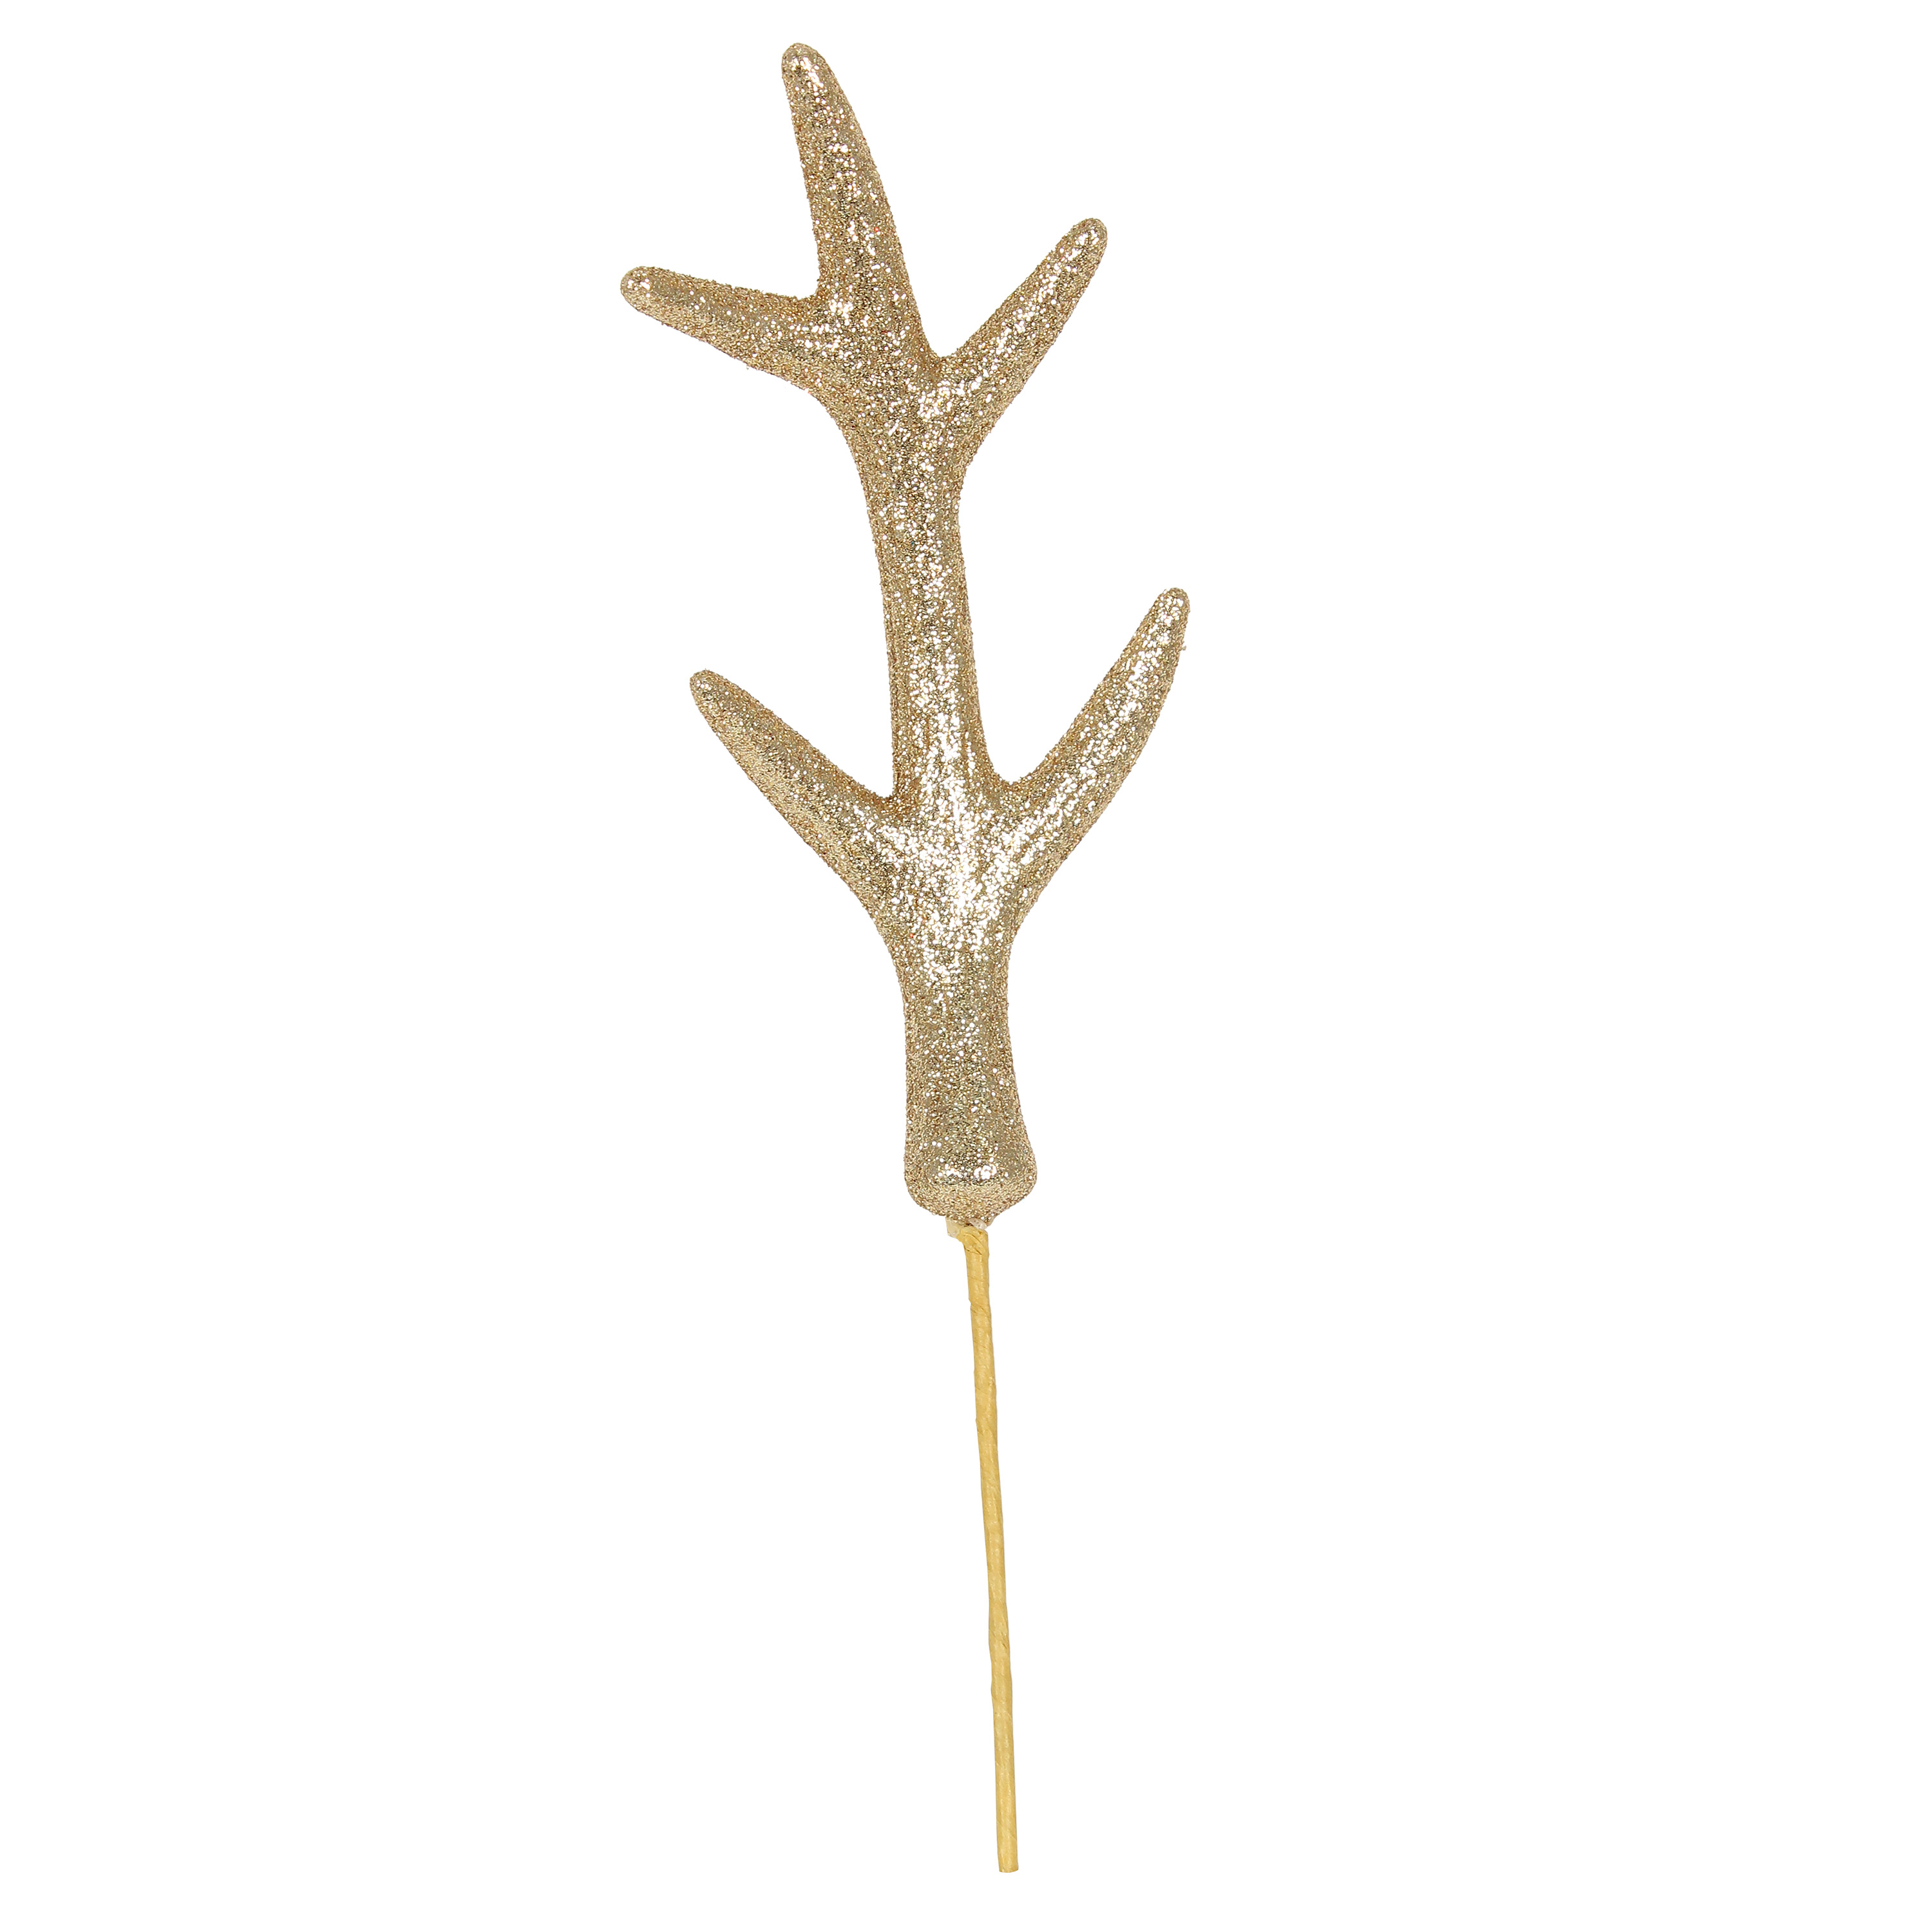 HOLIDAY TIME GOLD ANTLER PICK, 9 INCH - image 1 of 2